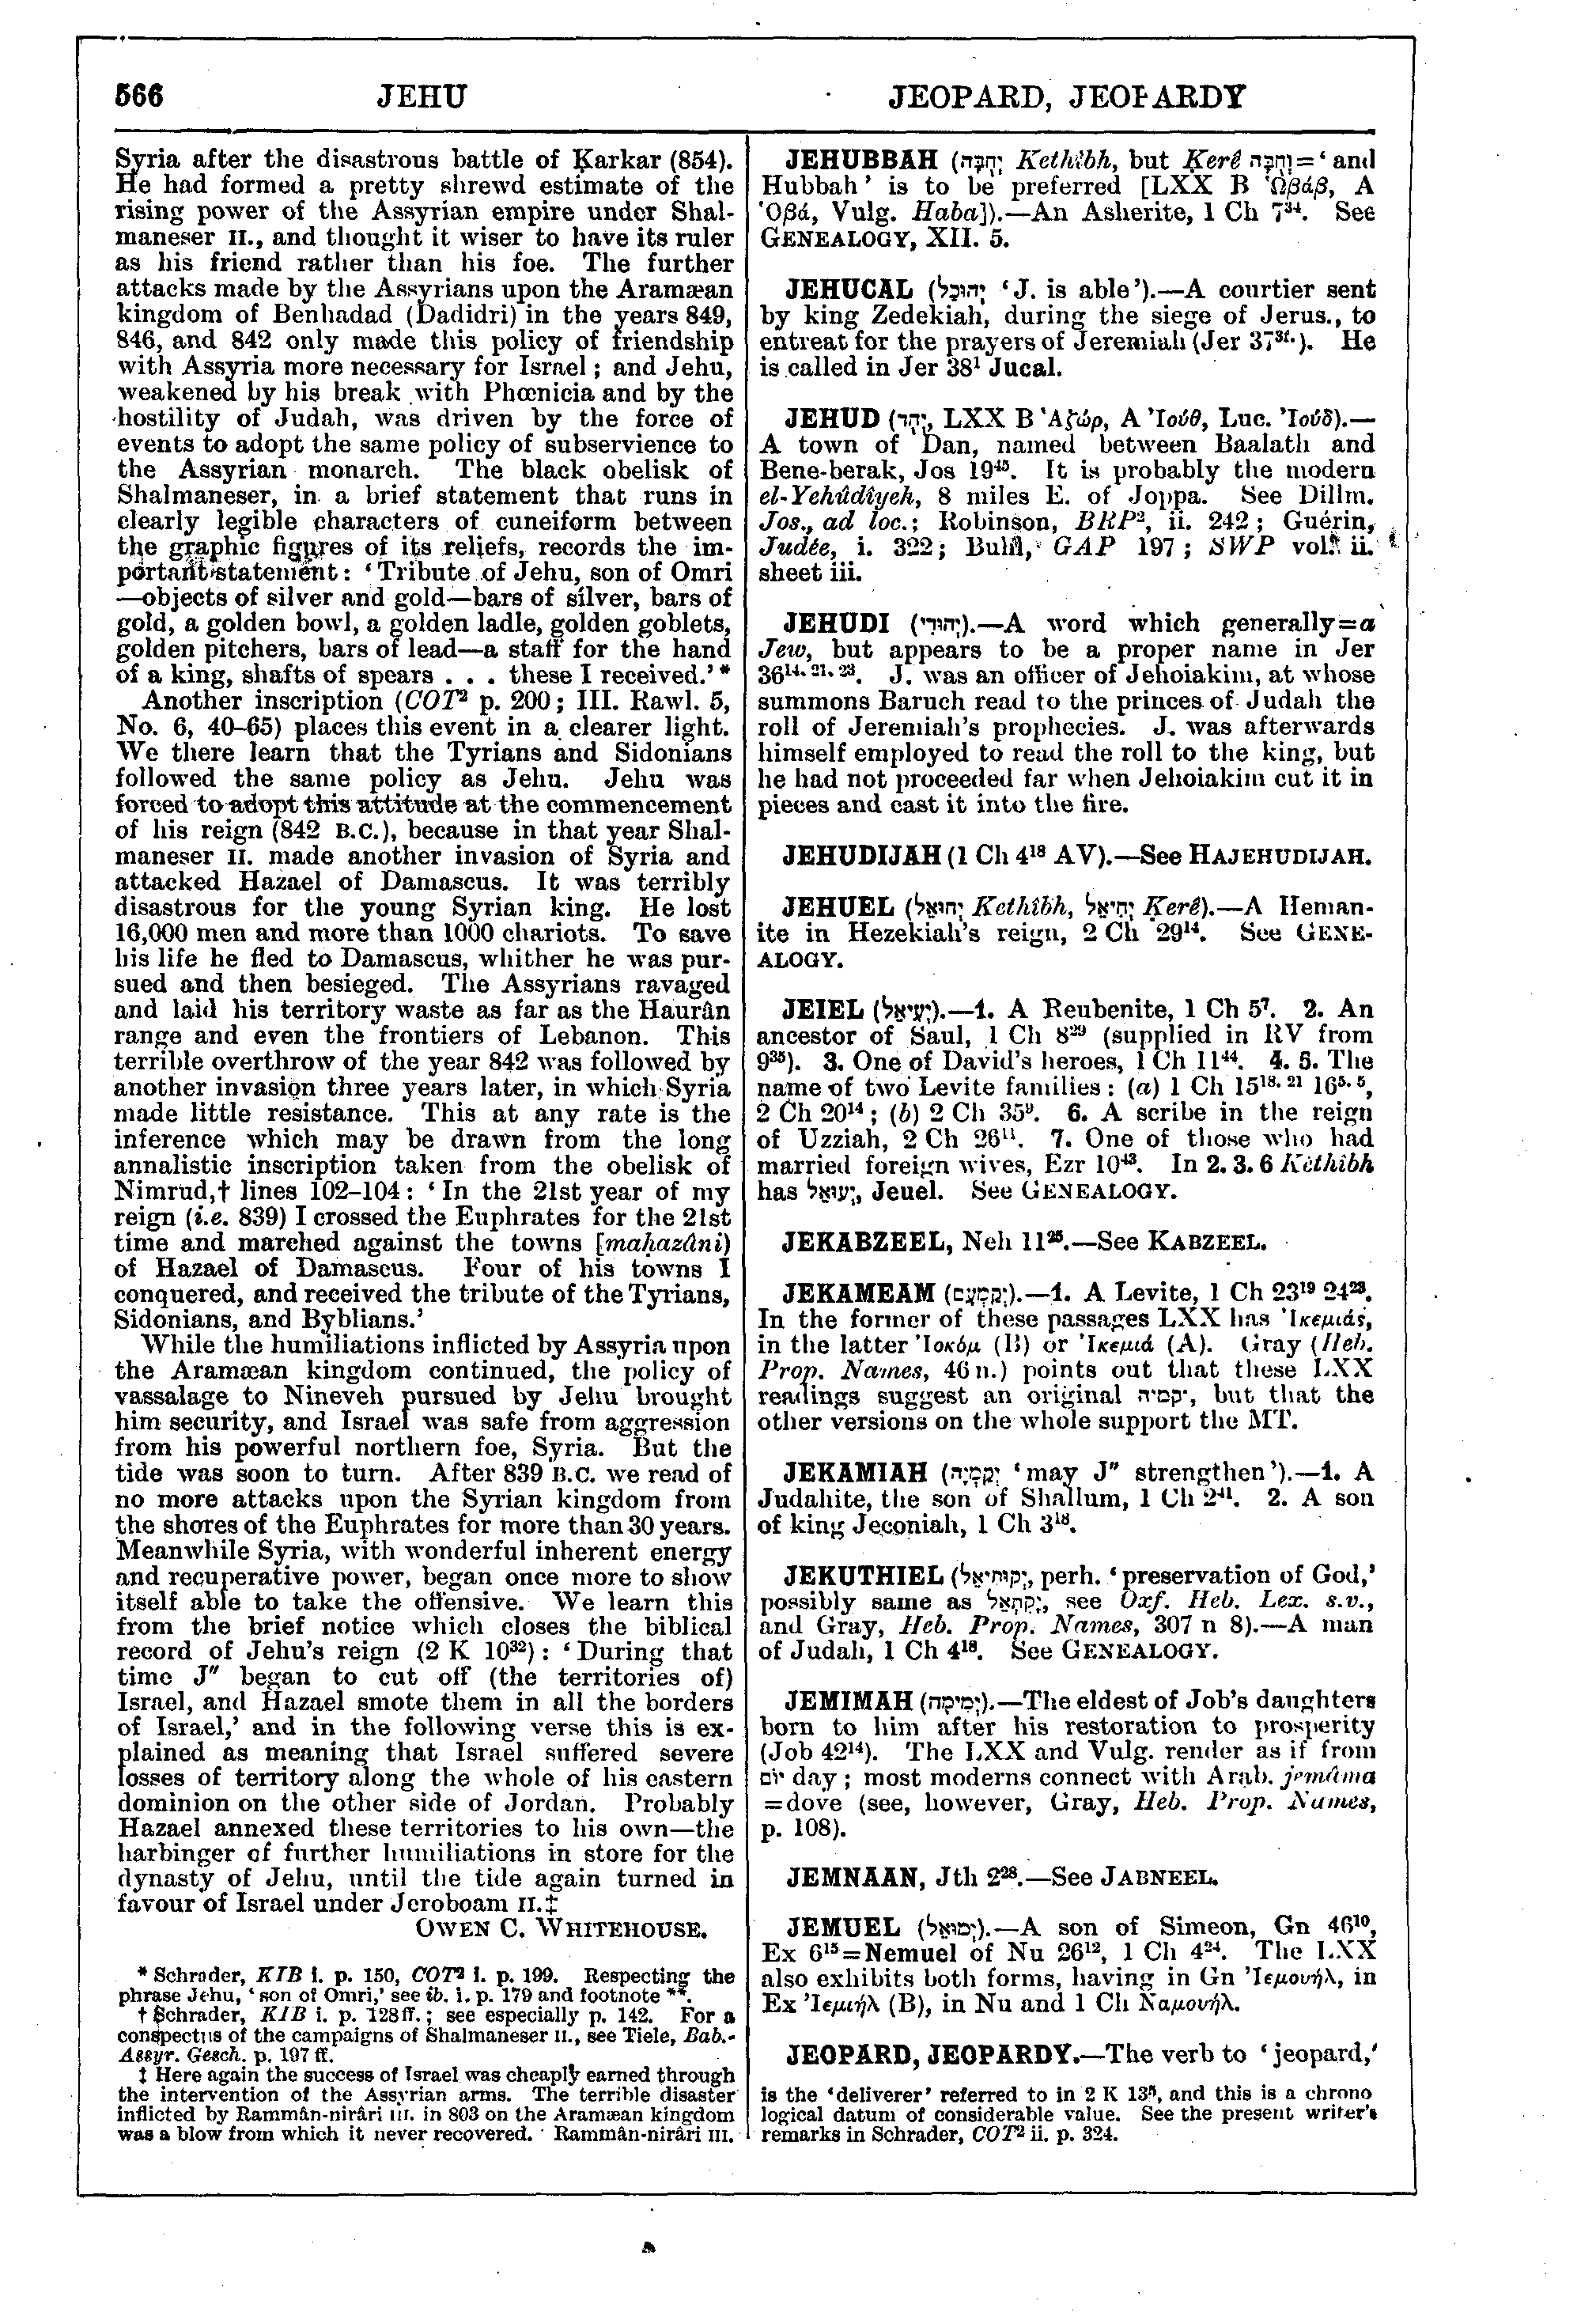 Image of page 566